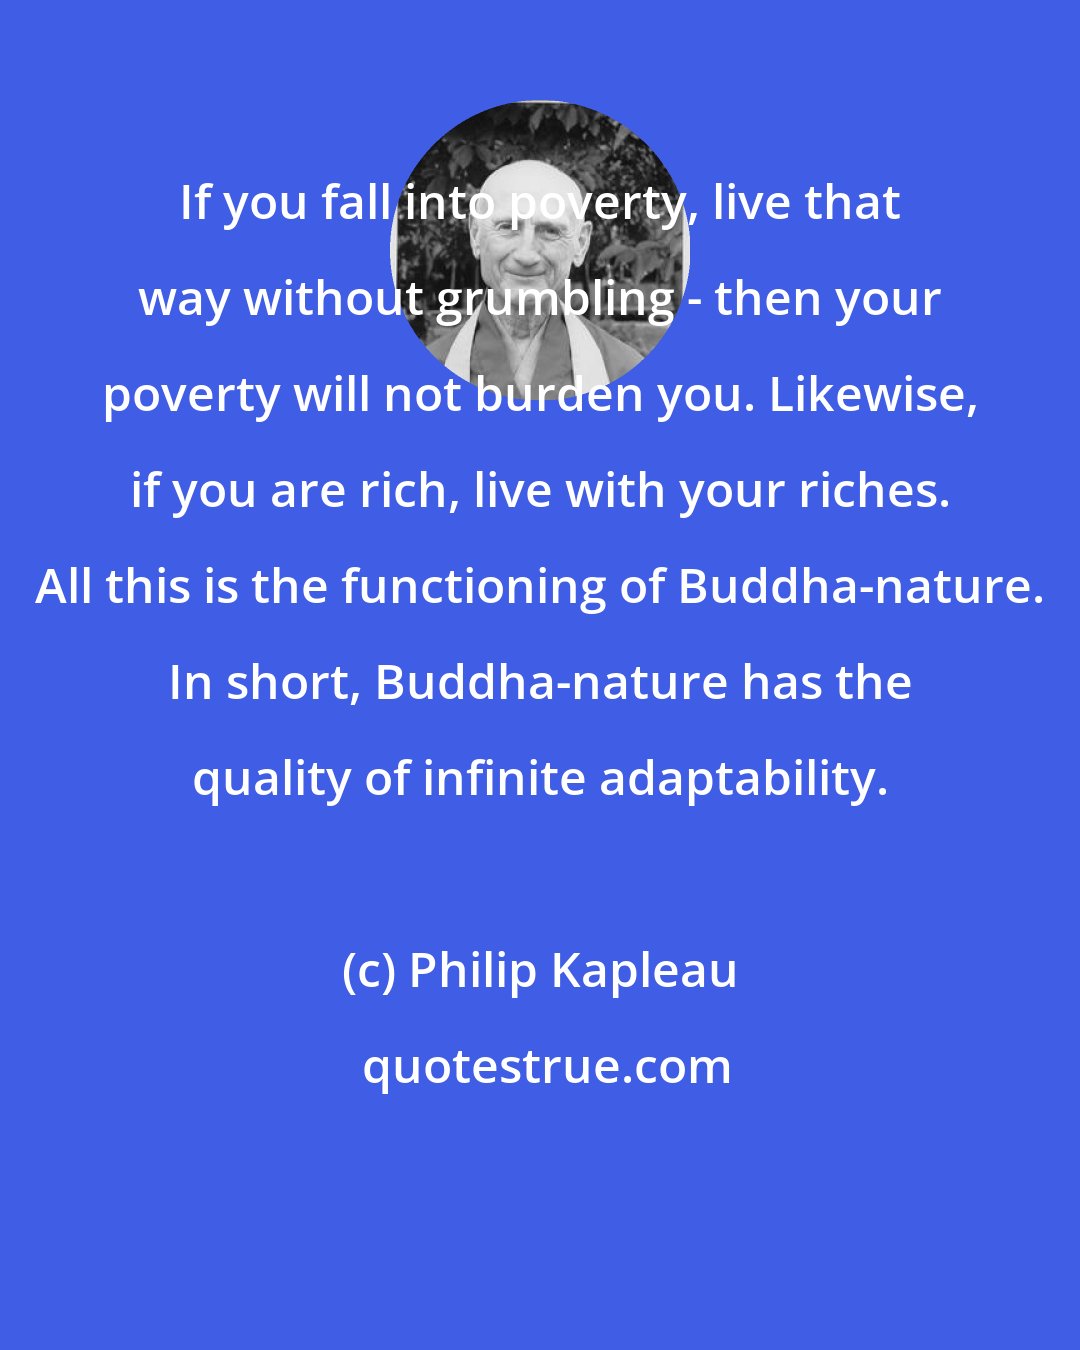 Philip Kapleau: If you fall into poverty, live that way without grumbling - then your poverty will not burden you. Likewise, if you are rich, live with your riches. All this is the functioning of Buddha-nature. In short, Buddha-nature has the quality of infinite adaptability.